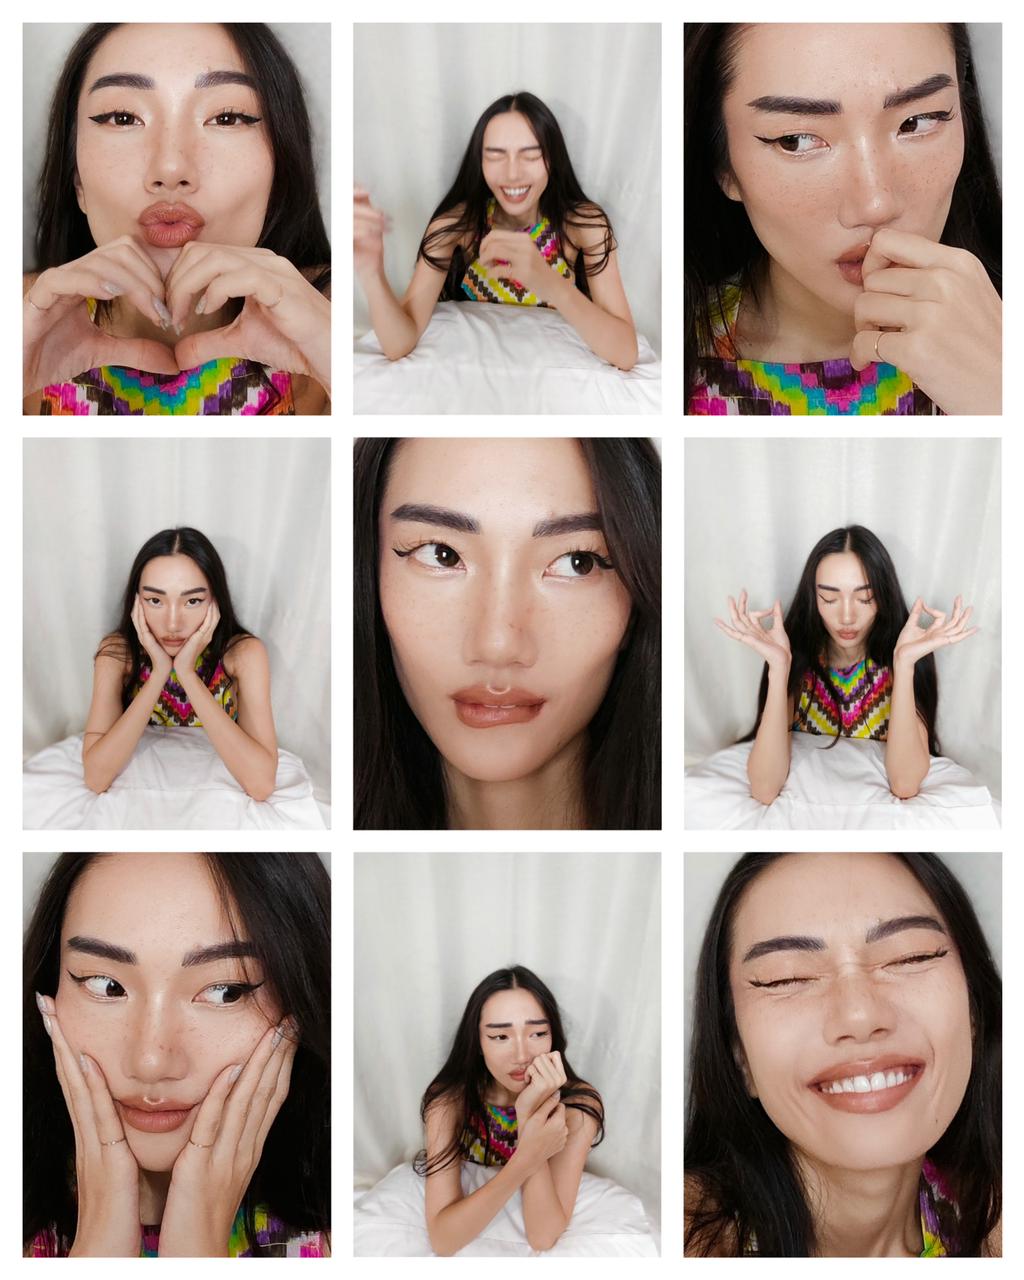 Why these influencers are showing 27 different emotions in online portraits